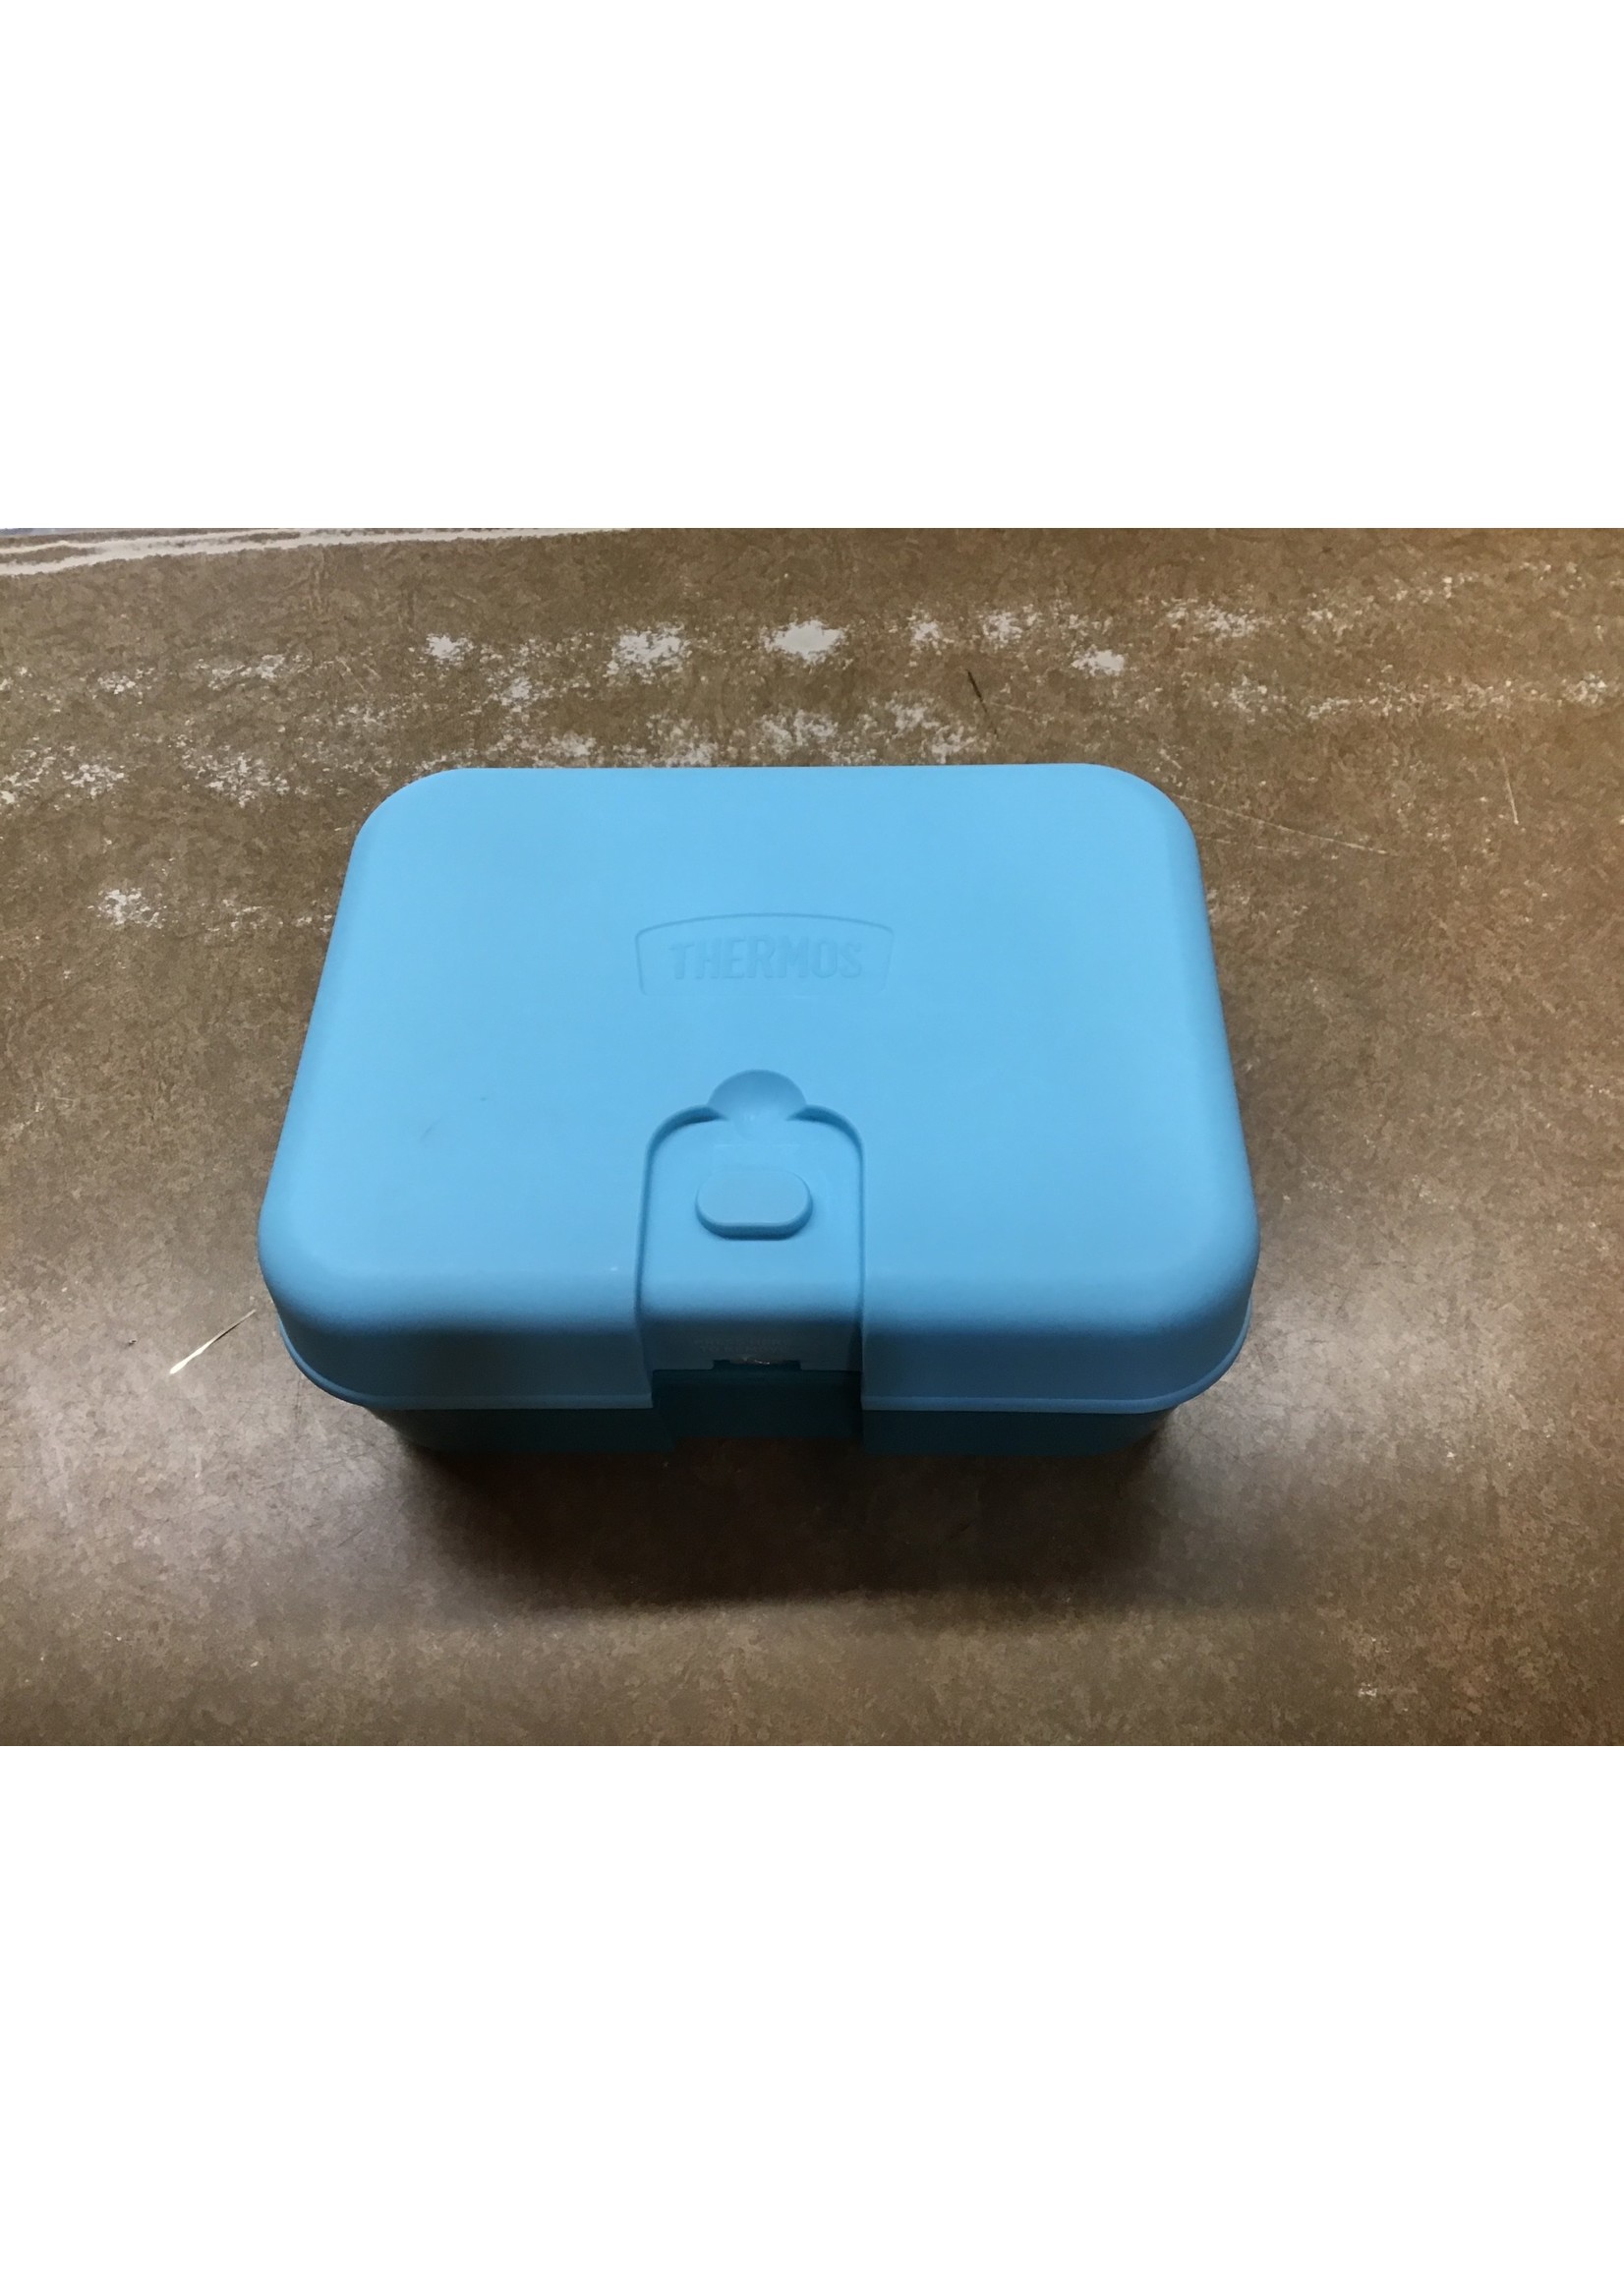 https://cdn.shoplightspeed.com/shops/633858/files/43693856/1652x2313x2/missing-containers-thermos-kids-freestyle-kit-teal.jpg